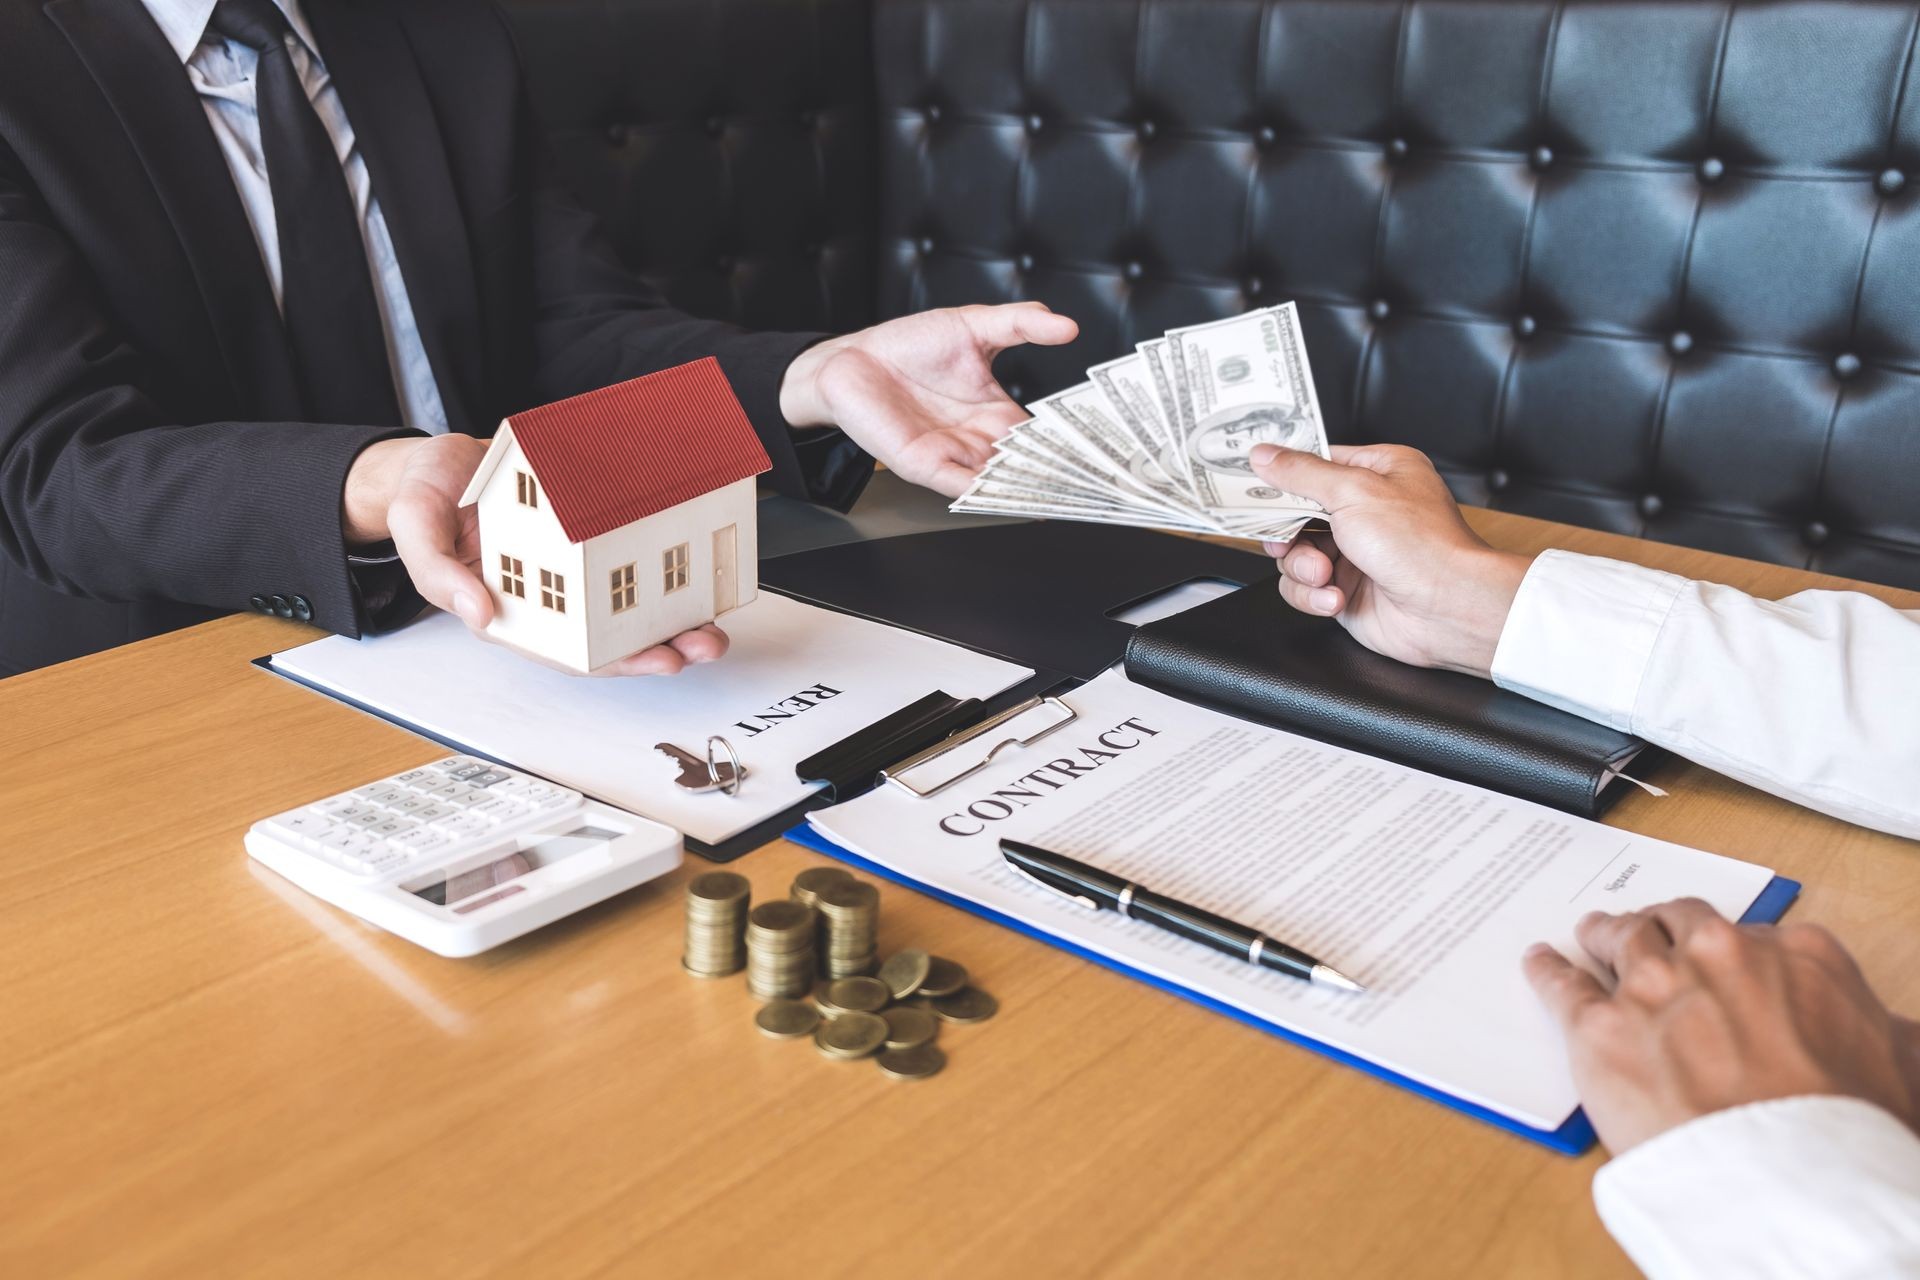 Estate agent broker receive money from client after signing agreement contract real estate with approved mortgage application form, buying or concerning mortgage loan offer for and house insurance.